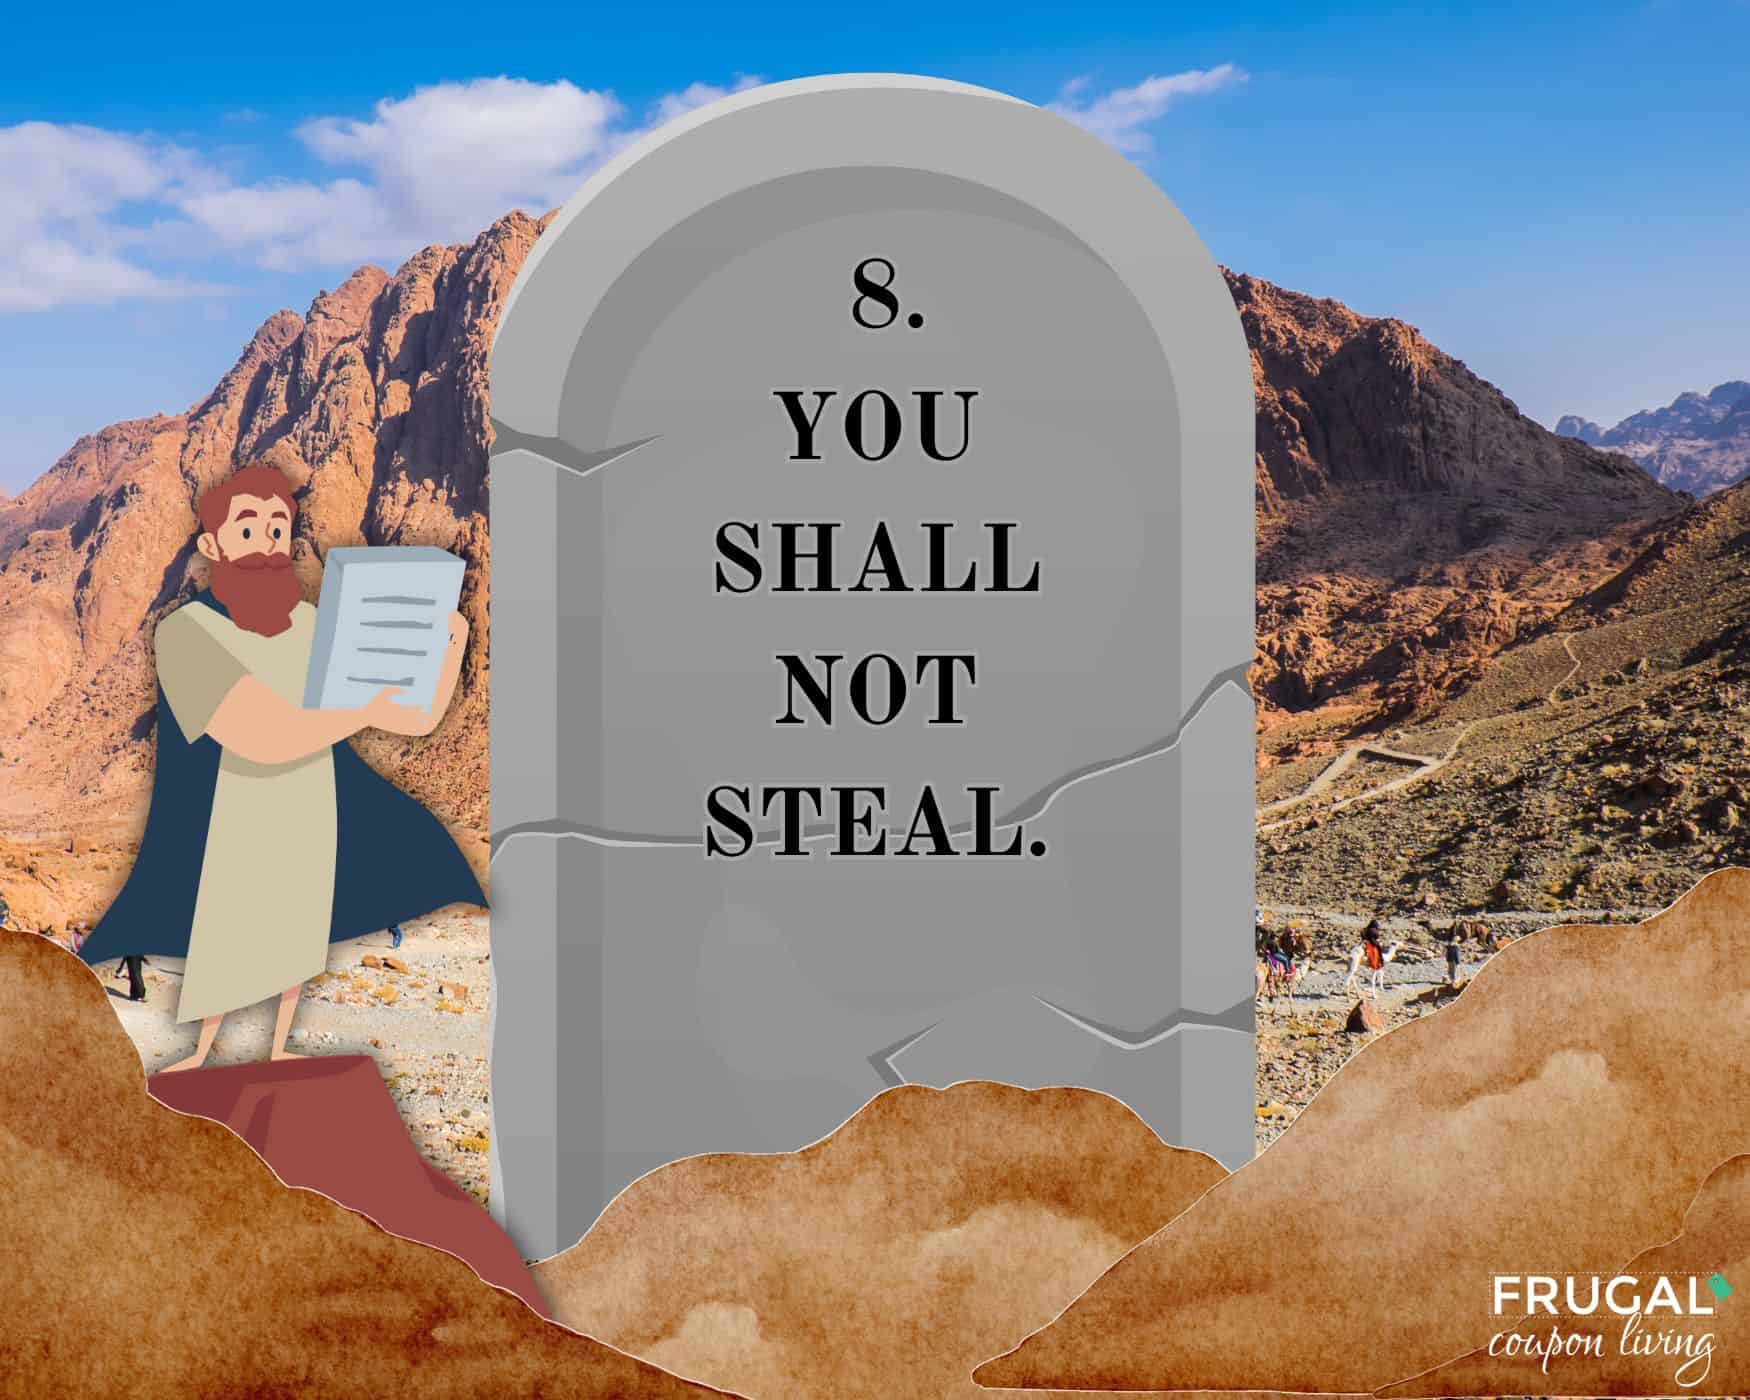 You shall not steal eight commandment tablet